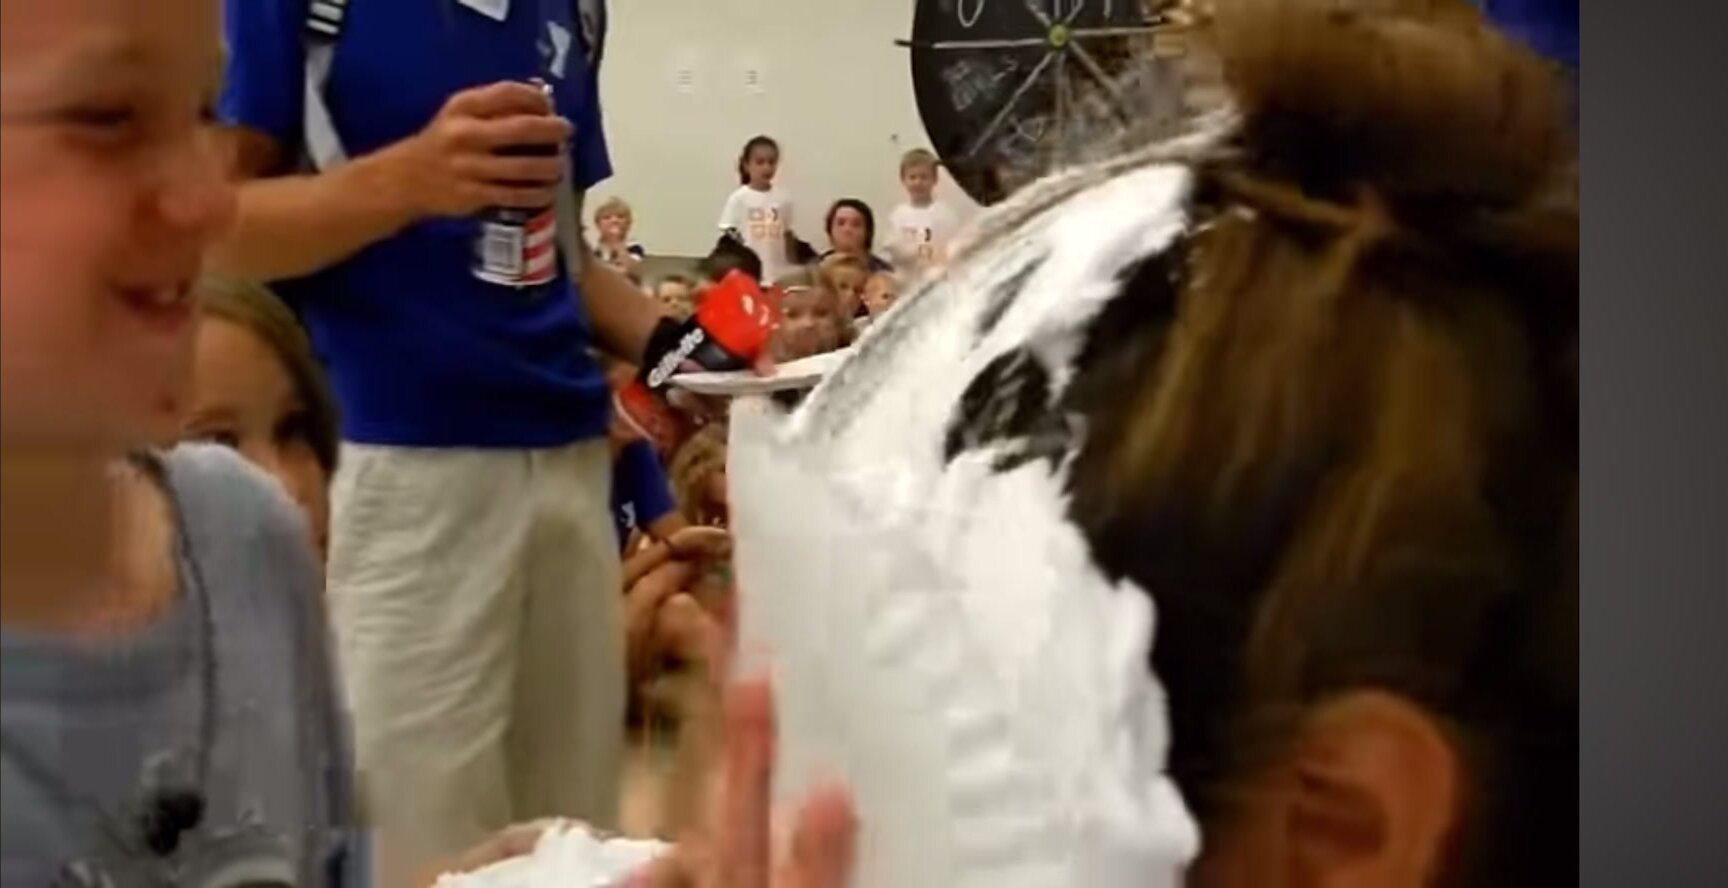 Camp counselor pied